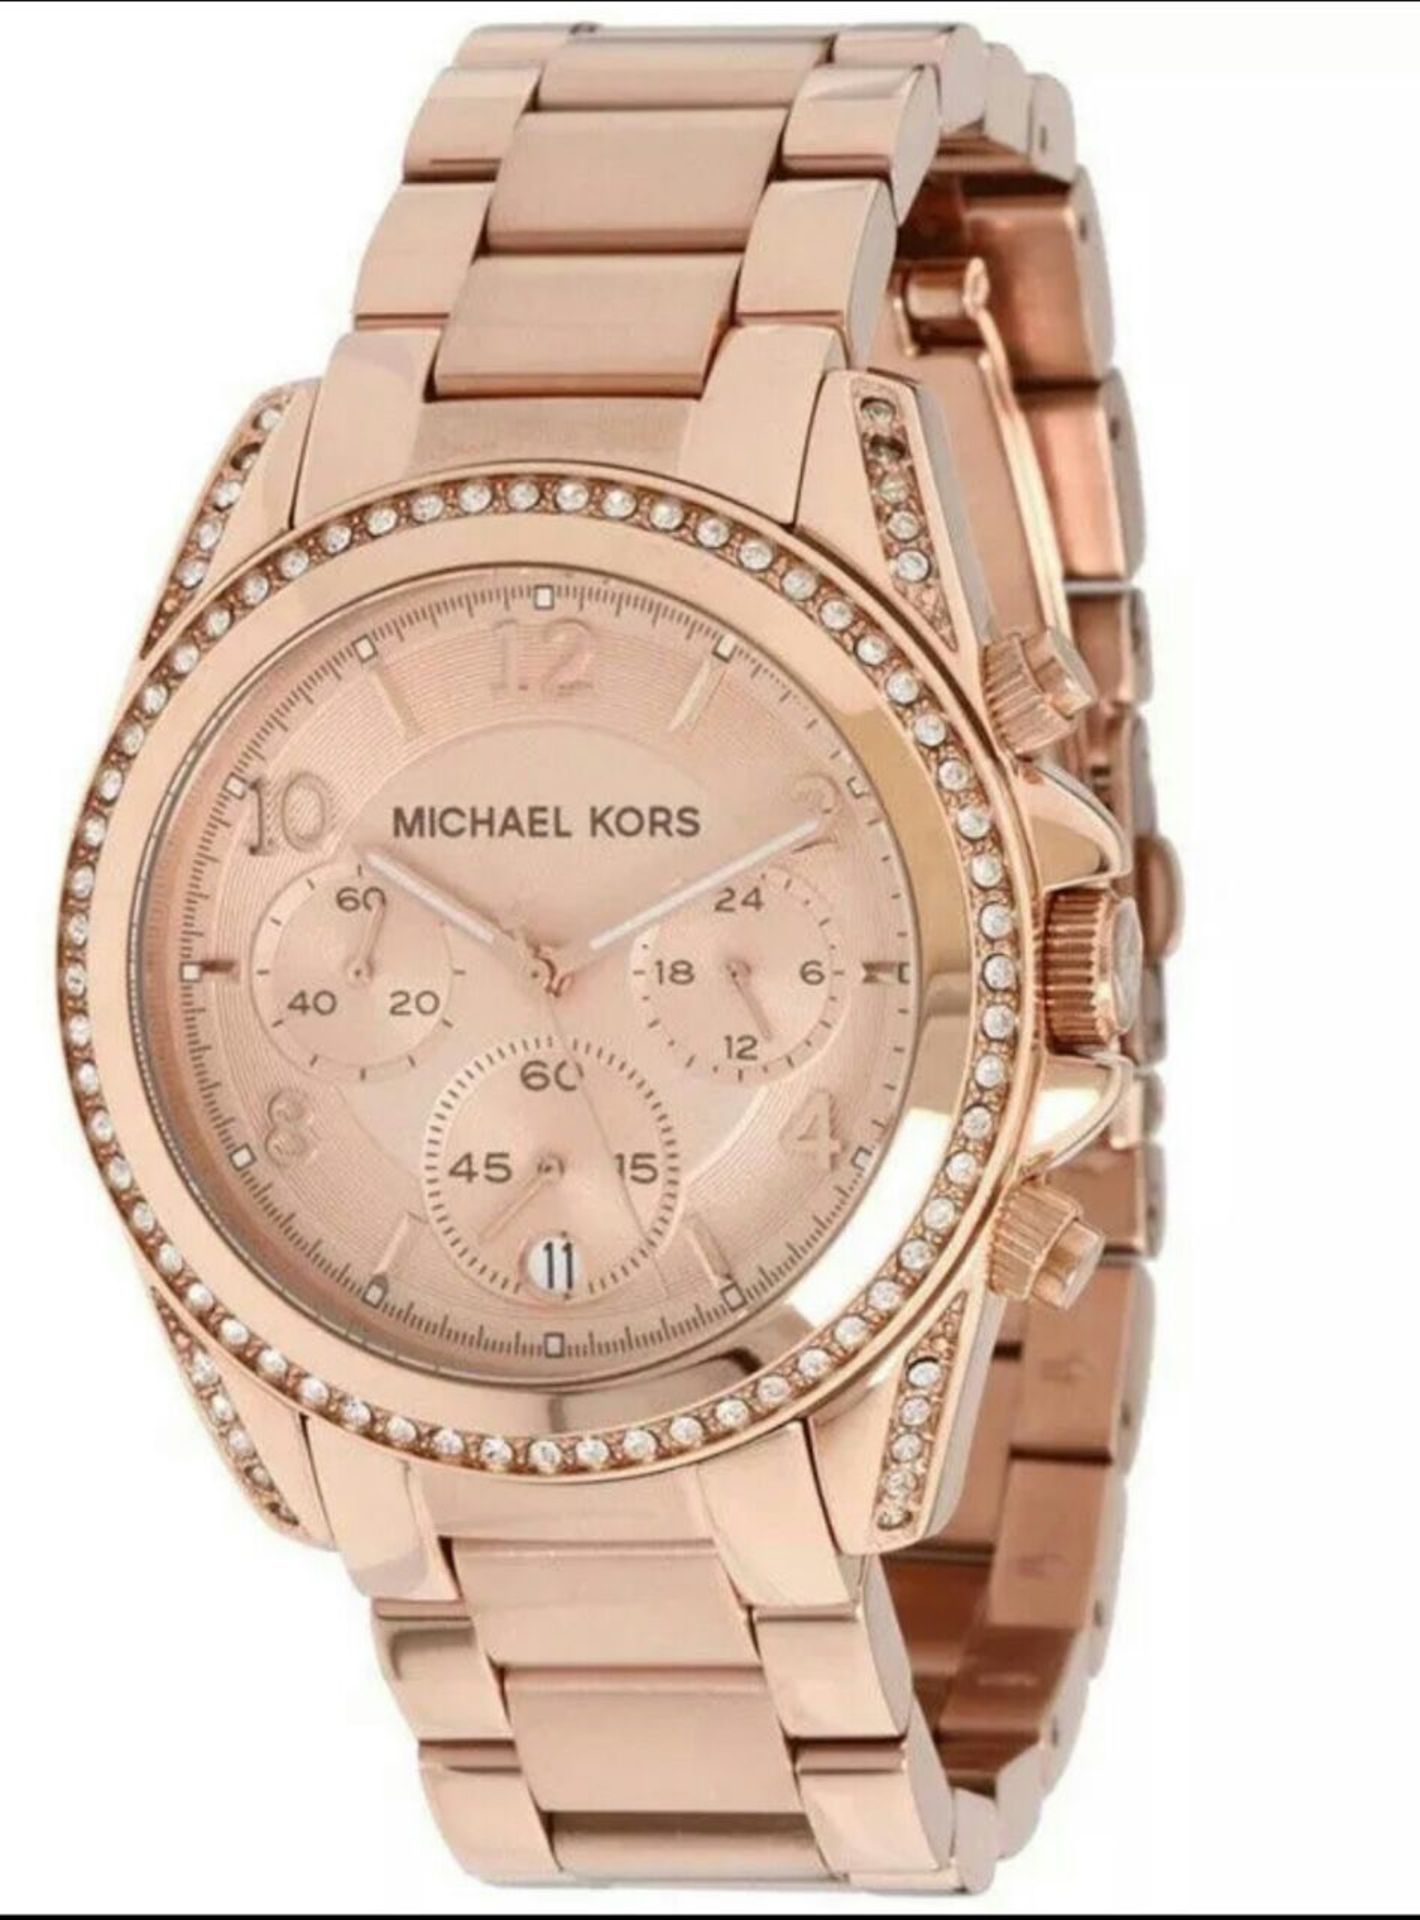 BRAND NEW LADIES MICHAEL KORS WATCH MK5263, COMPLETE WITH ORIGINAL BOX AND MANUAL - FREE P & P